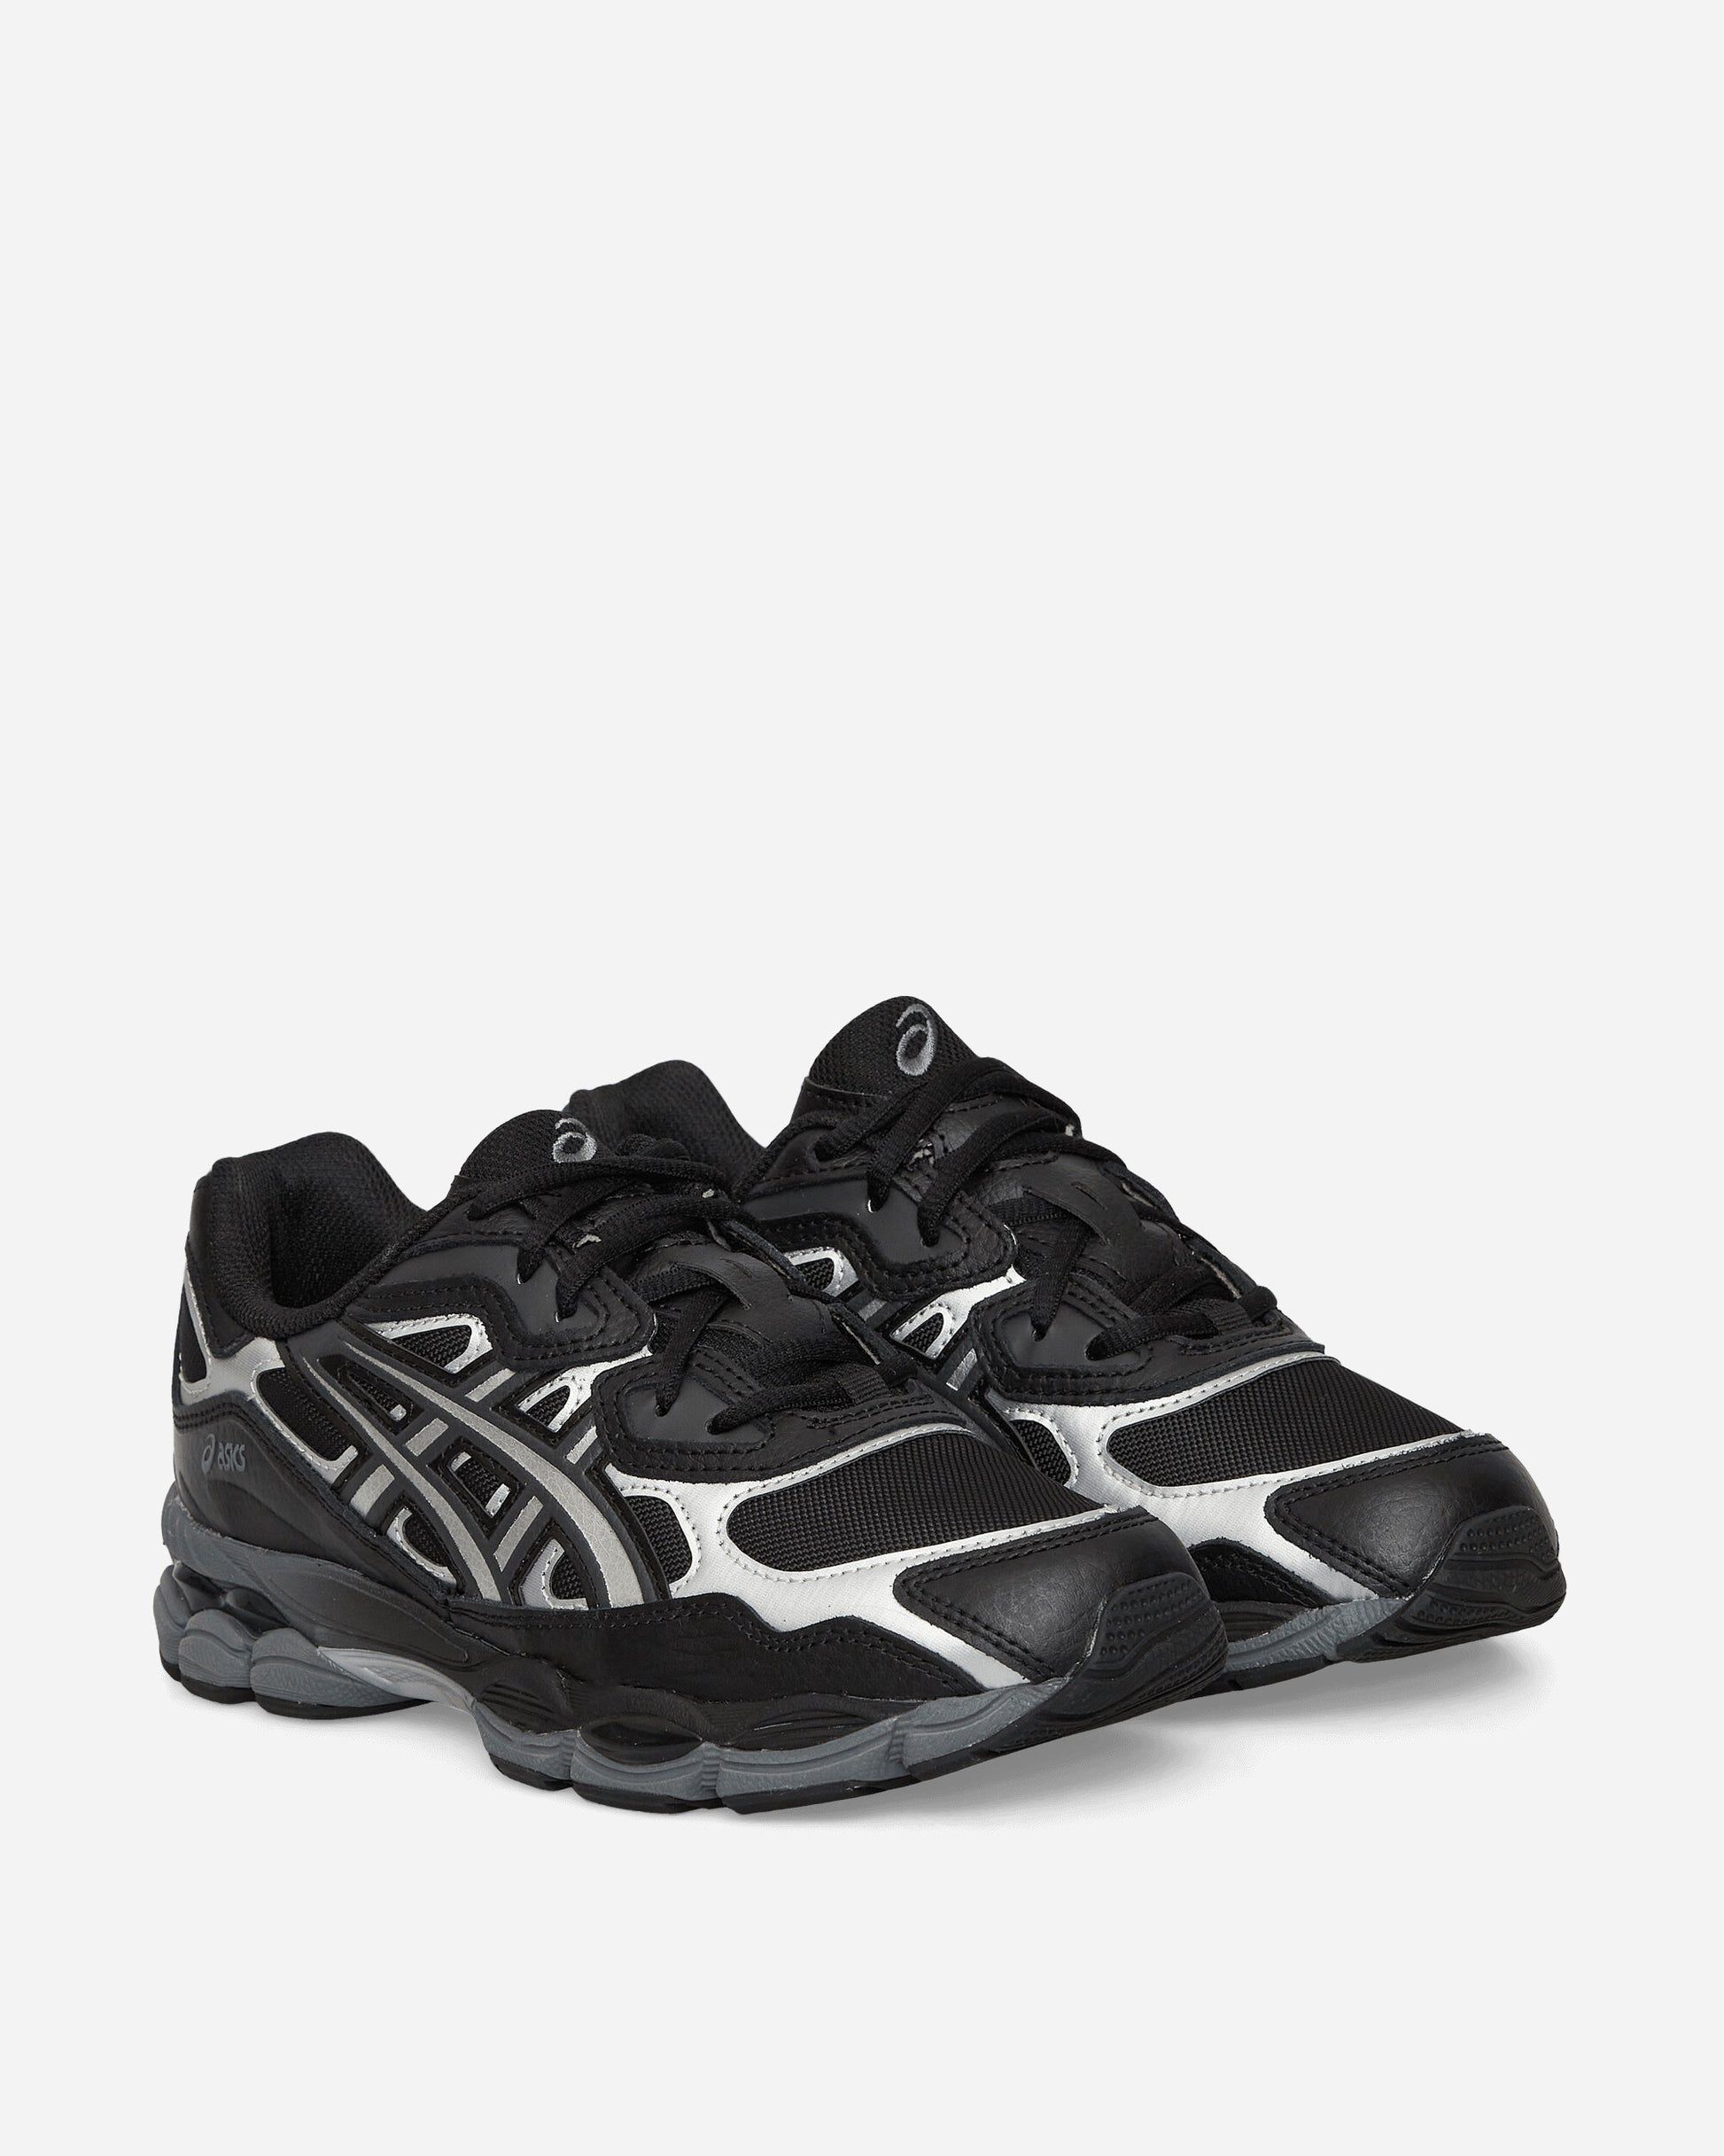 Asics Gel-Nyc Black/Graphite Grey Sneakers Low 1203A280-002